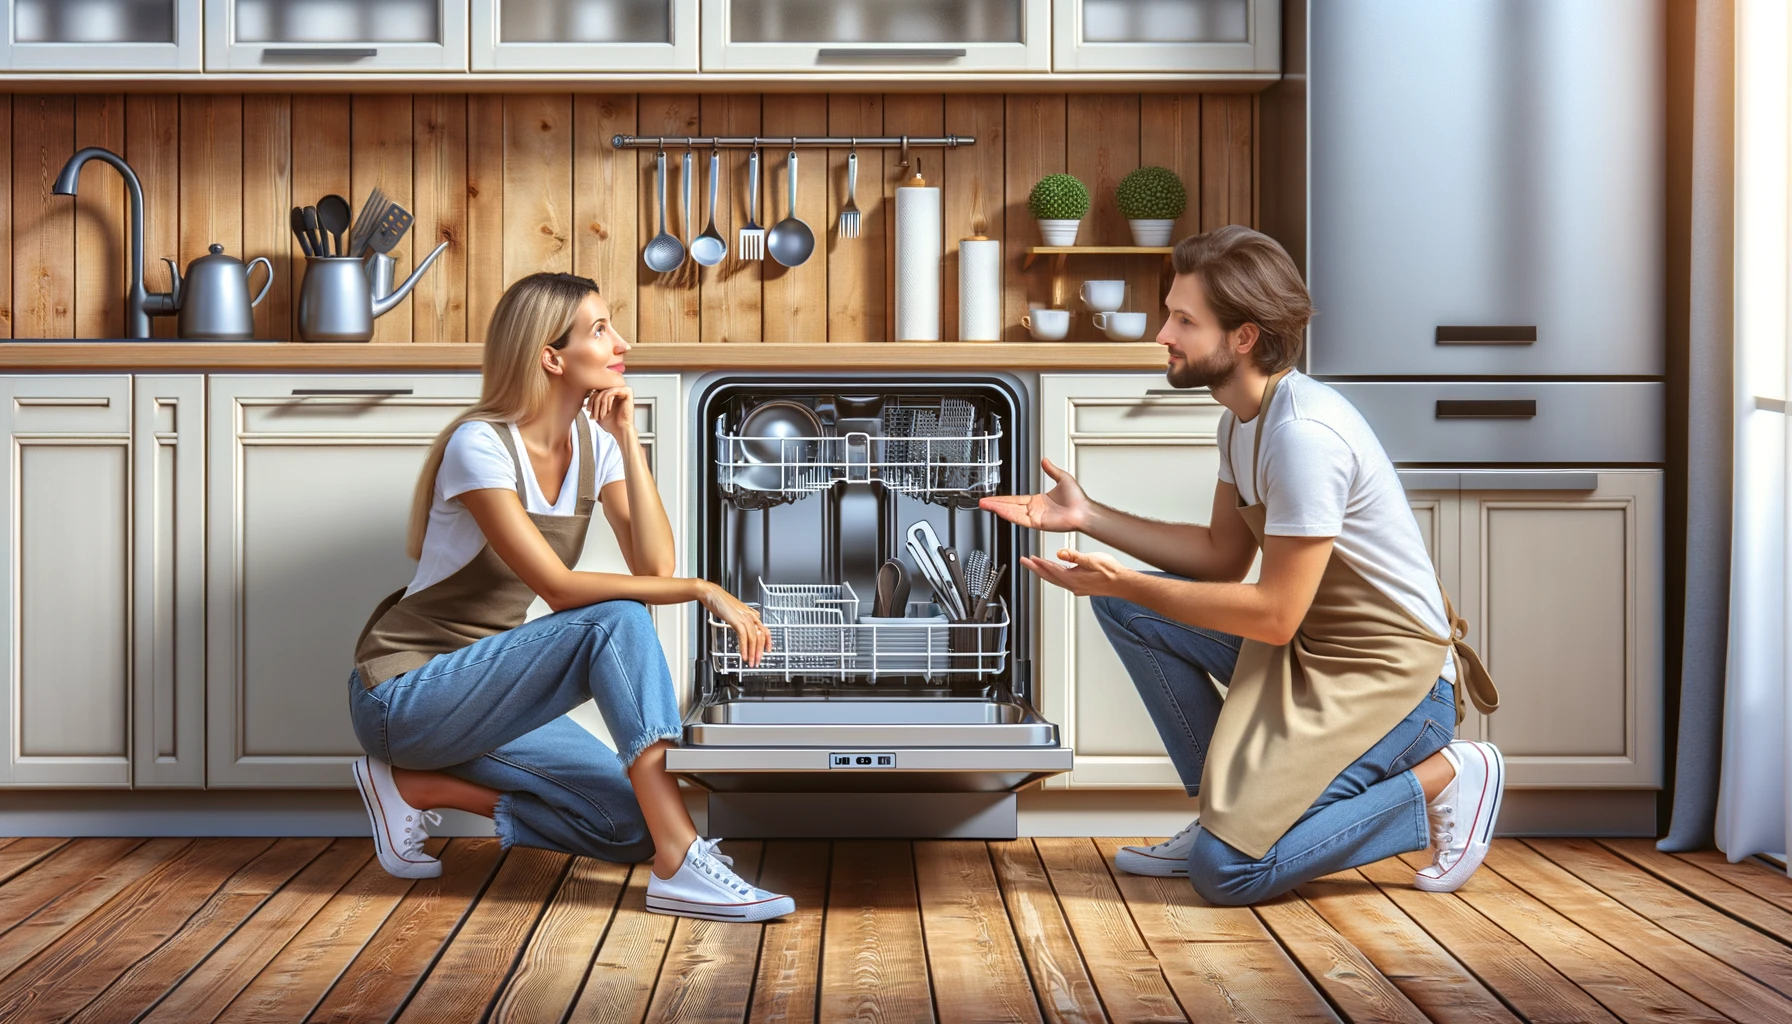 7 Common Dishwasher Problems and How to Fix Them